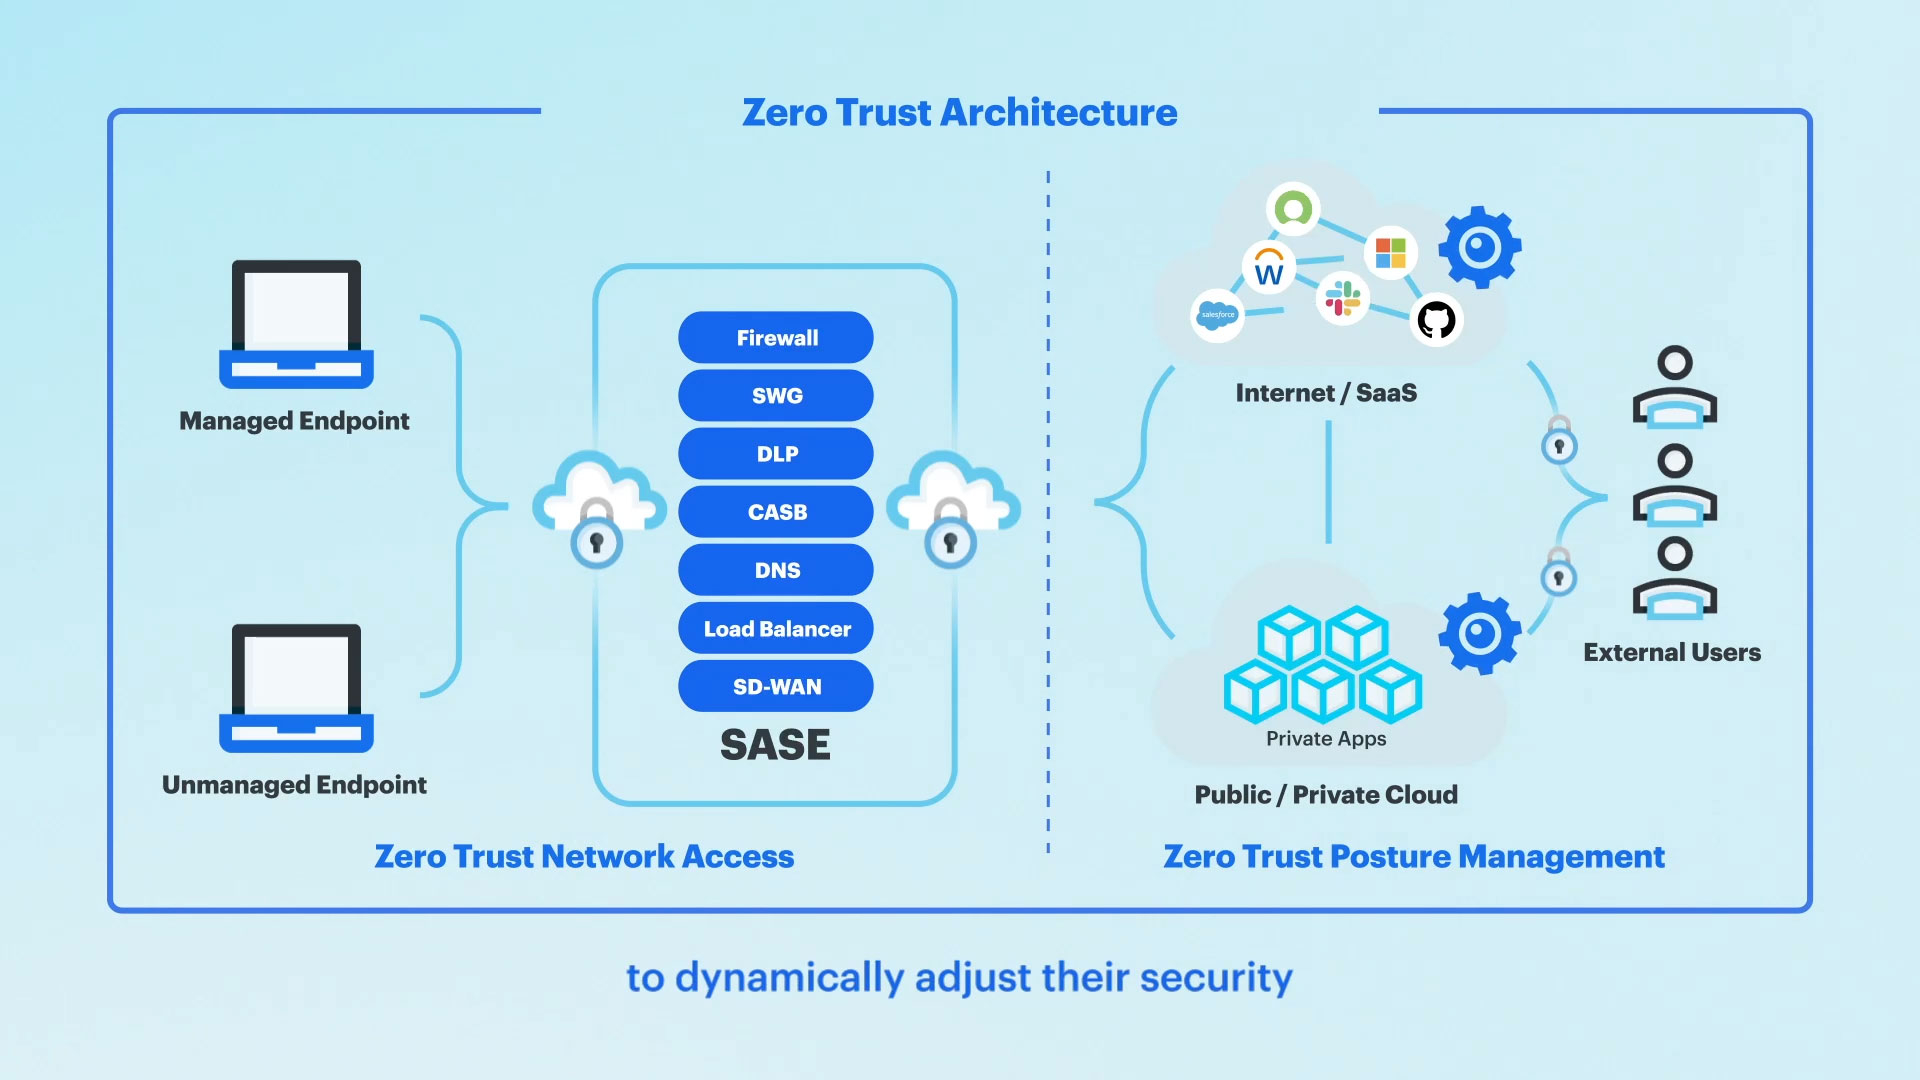 AppOmni Zero Trust Posture Management (ZTPM) fills a critical gap in network-centric Zero Trust architectures to ensure a comprehensive security posture that encompasses every facet of application interaction and data processing, going further than ever in delivering on the potential of Zero Trust in sprawling SaaS deployments.